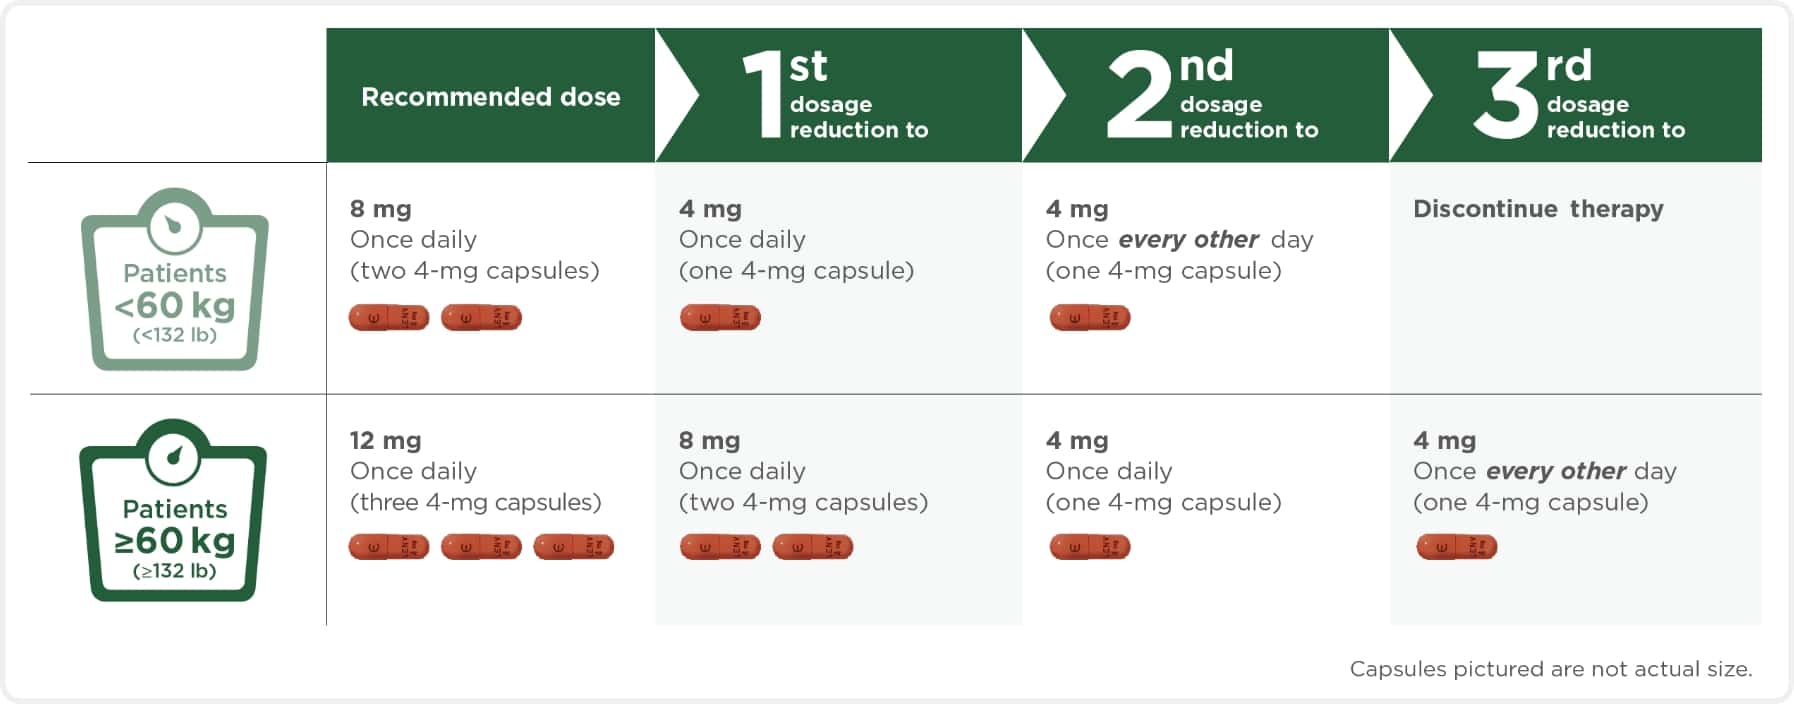 Recommended dose reductions for 8-mg and 12-mg daily dose of LENVIMA